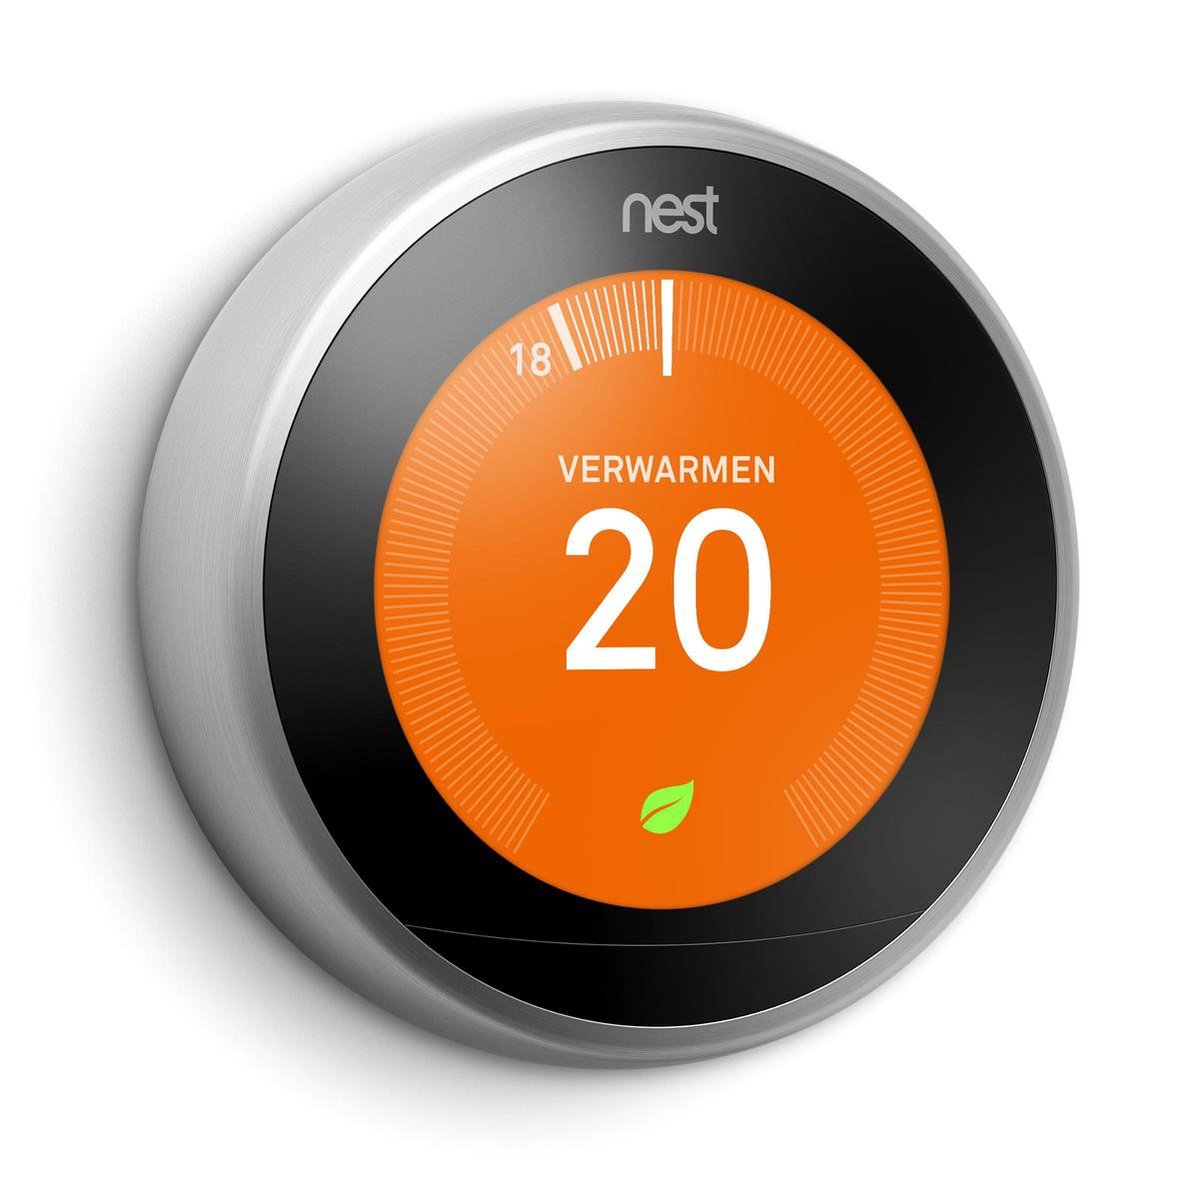 Google Nest Learning Thermostat - Slimme thermostaat - Bedraad - RVS review